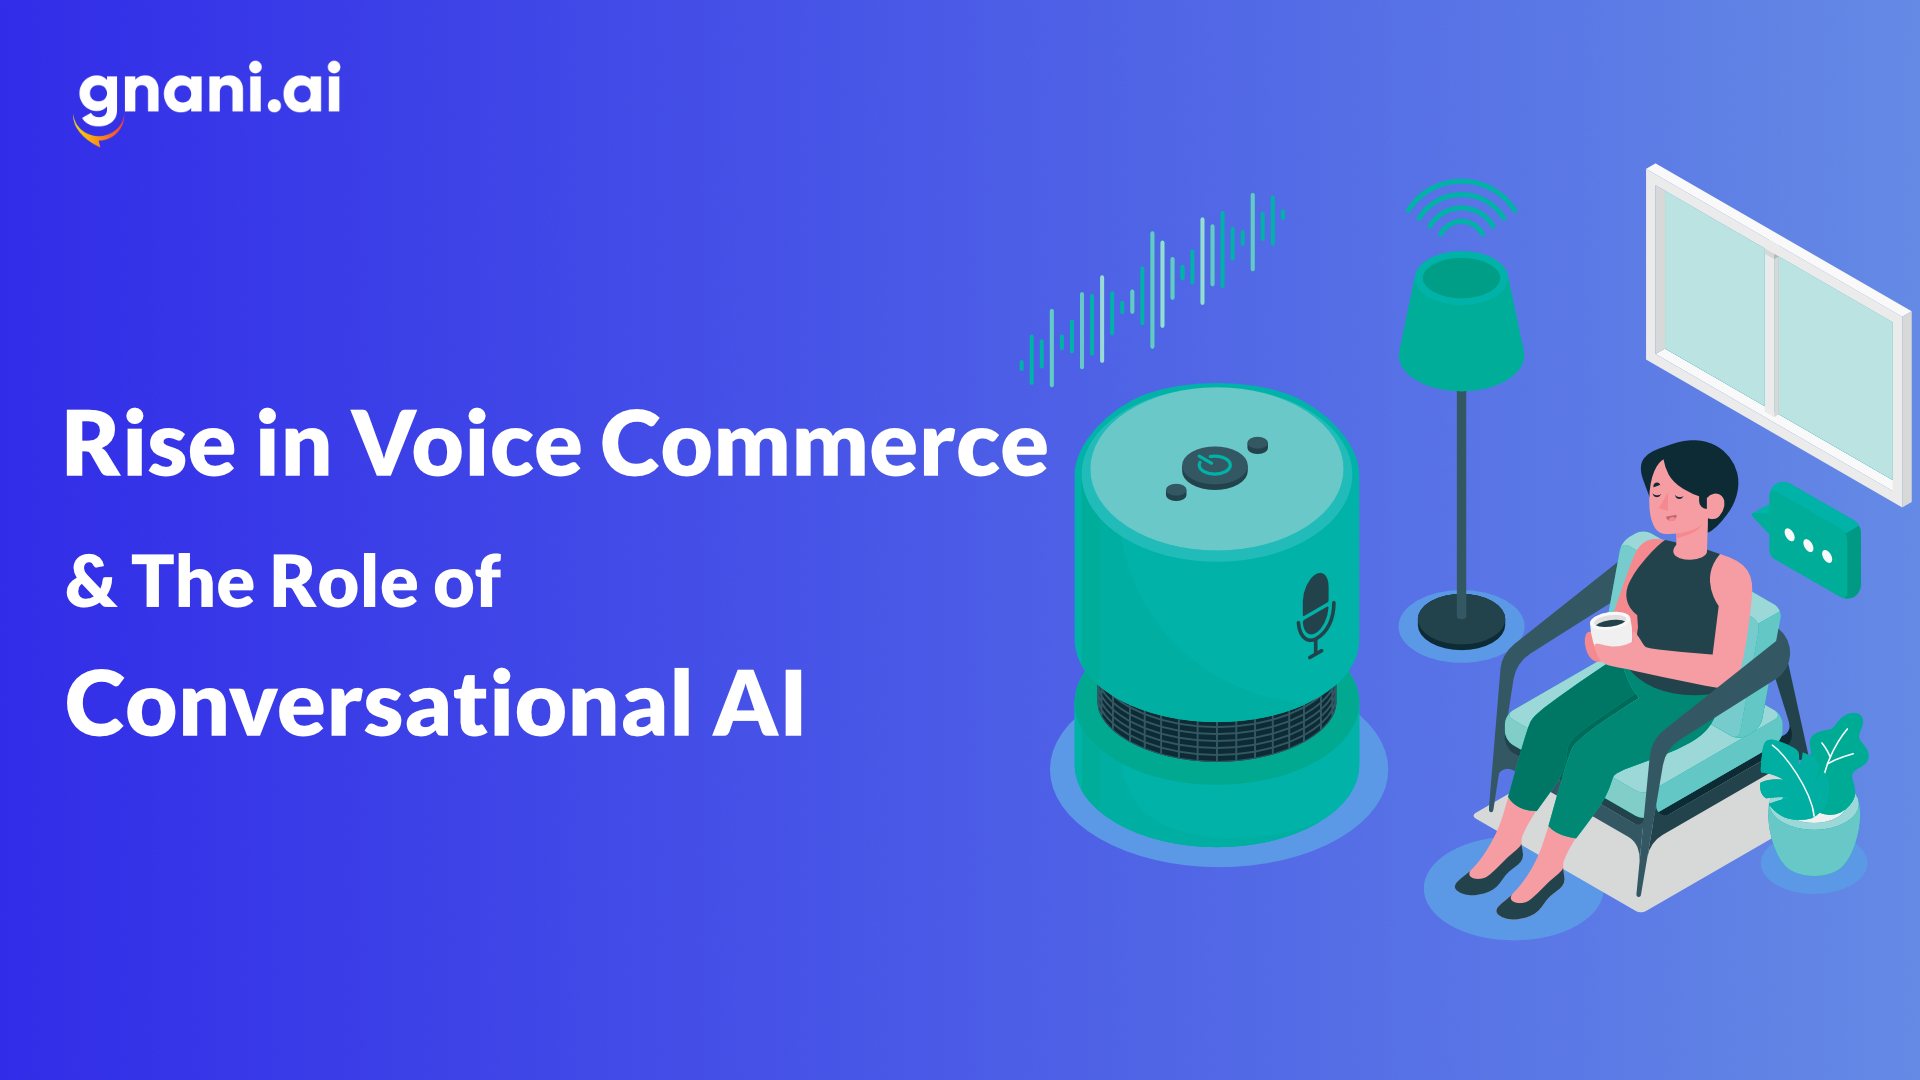 rise in voice commerce and conversational ai